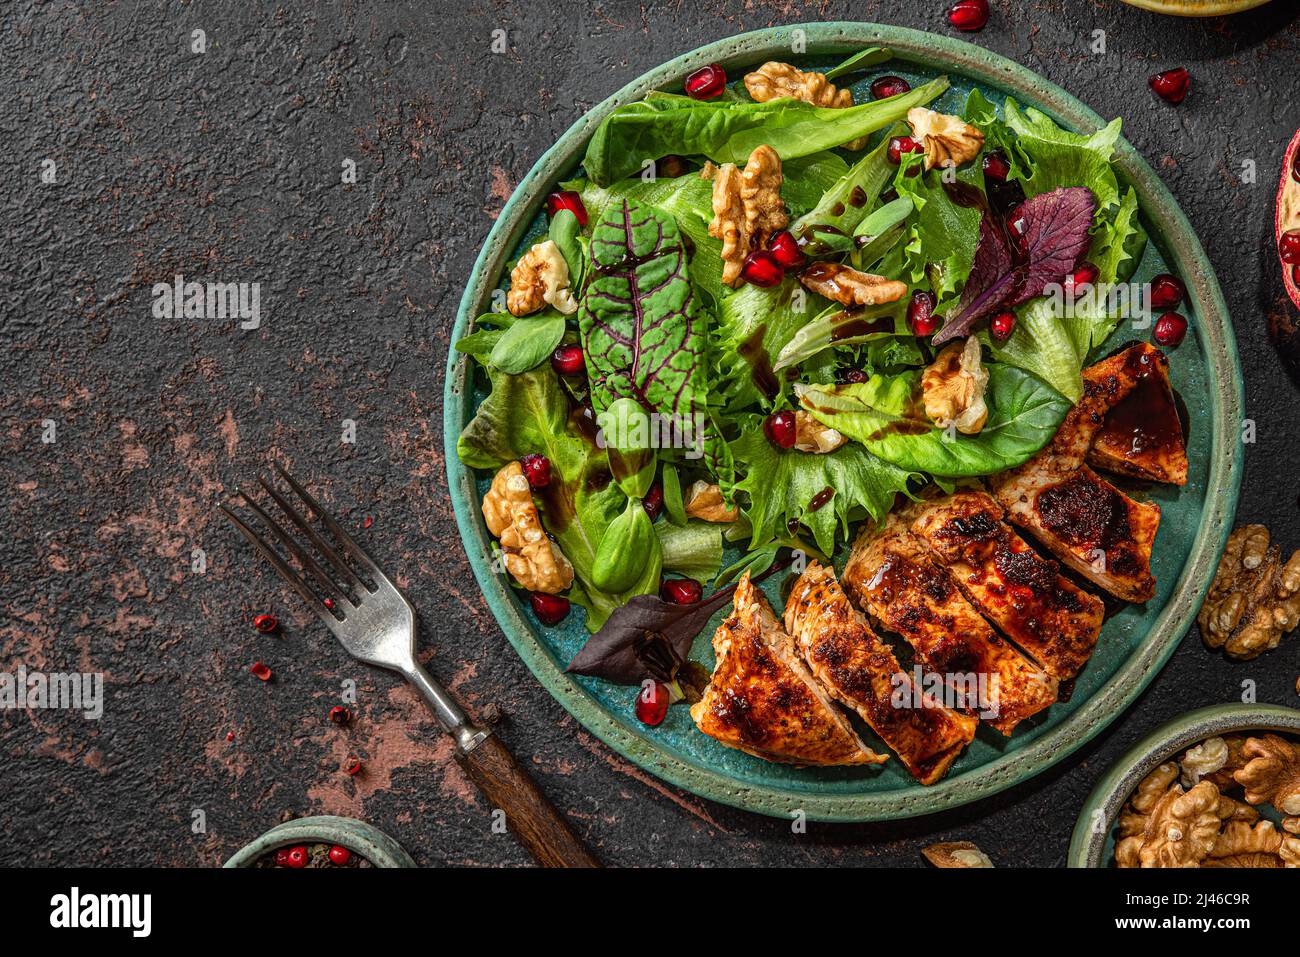 Grilled chicken breast fillet and mix salad with walnuts, pomegranate and balsamic sauce on dark background with fork. top view. healthy food Stock Photo